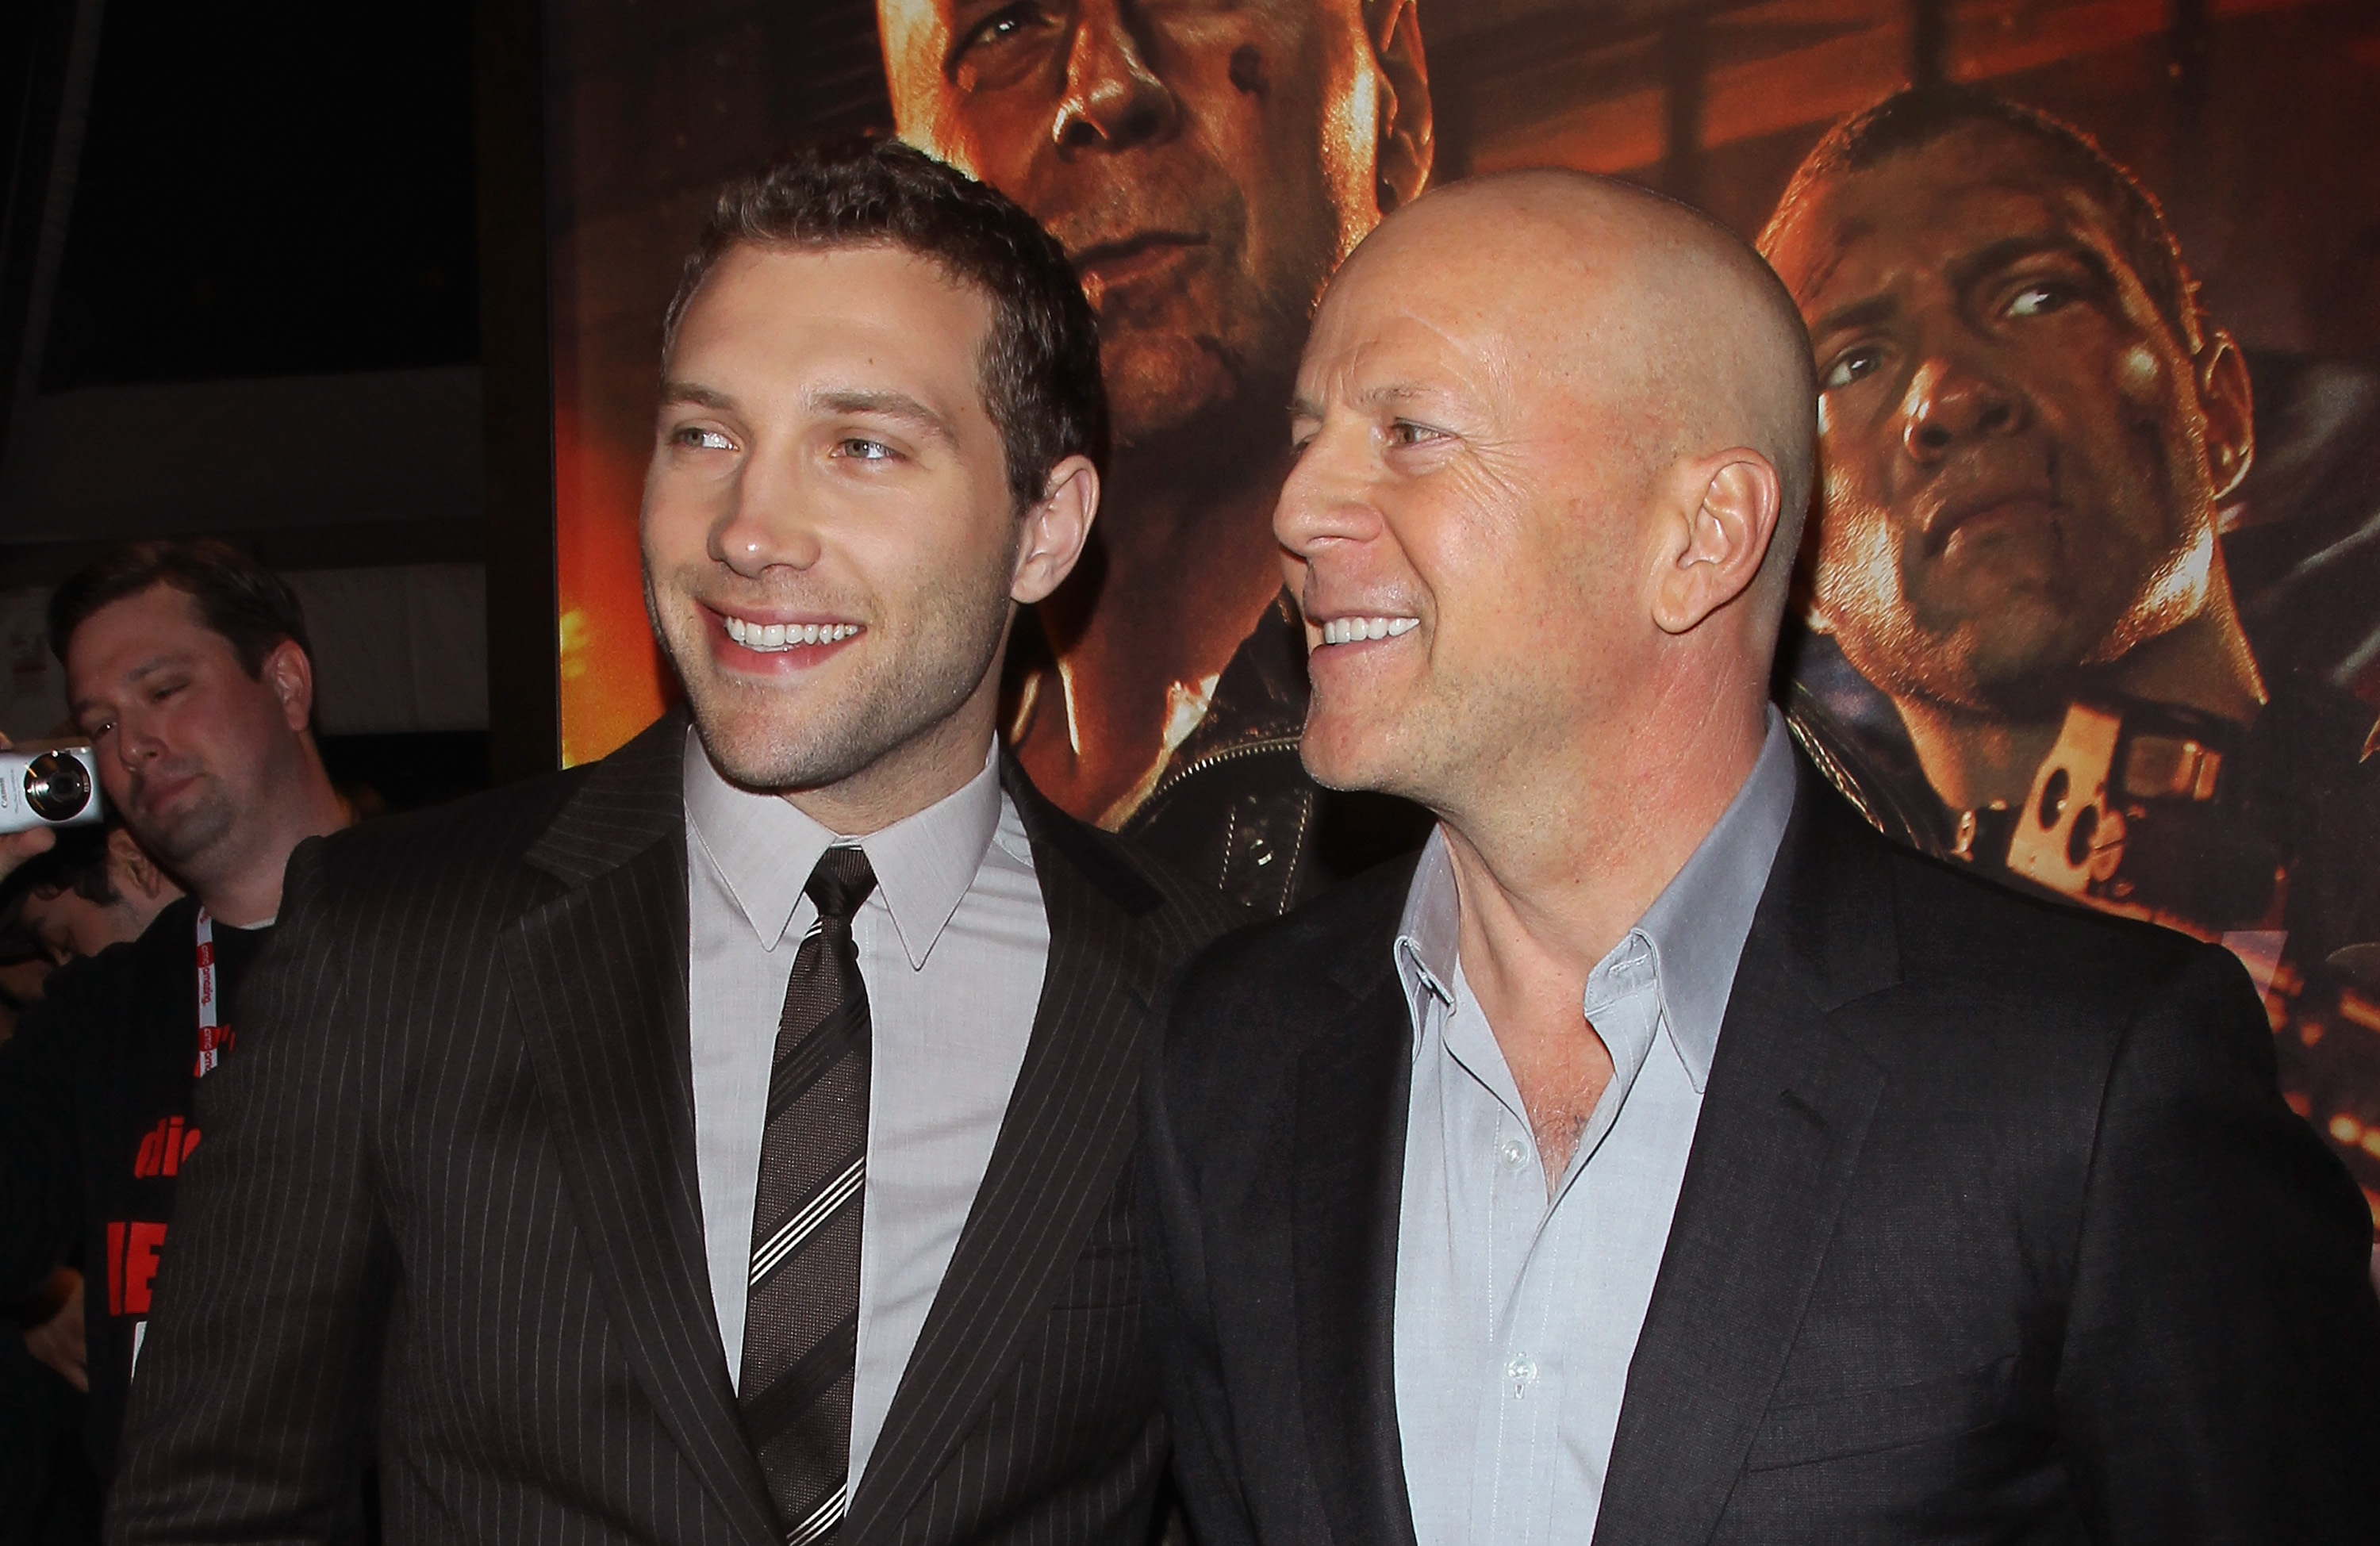 Jai Courtney and Bruce Willis at "A Good Day To Die Hard" Fan Celebration, AMC Empire, New York City, February 13, 2013 | Source: Getty Images